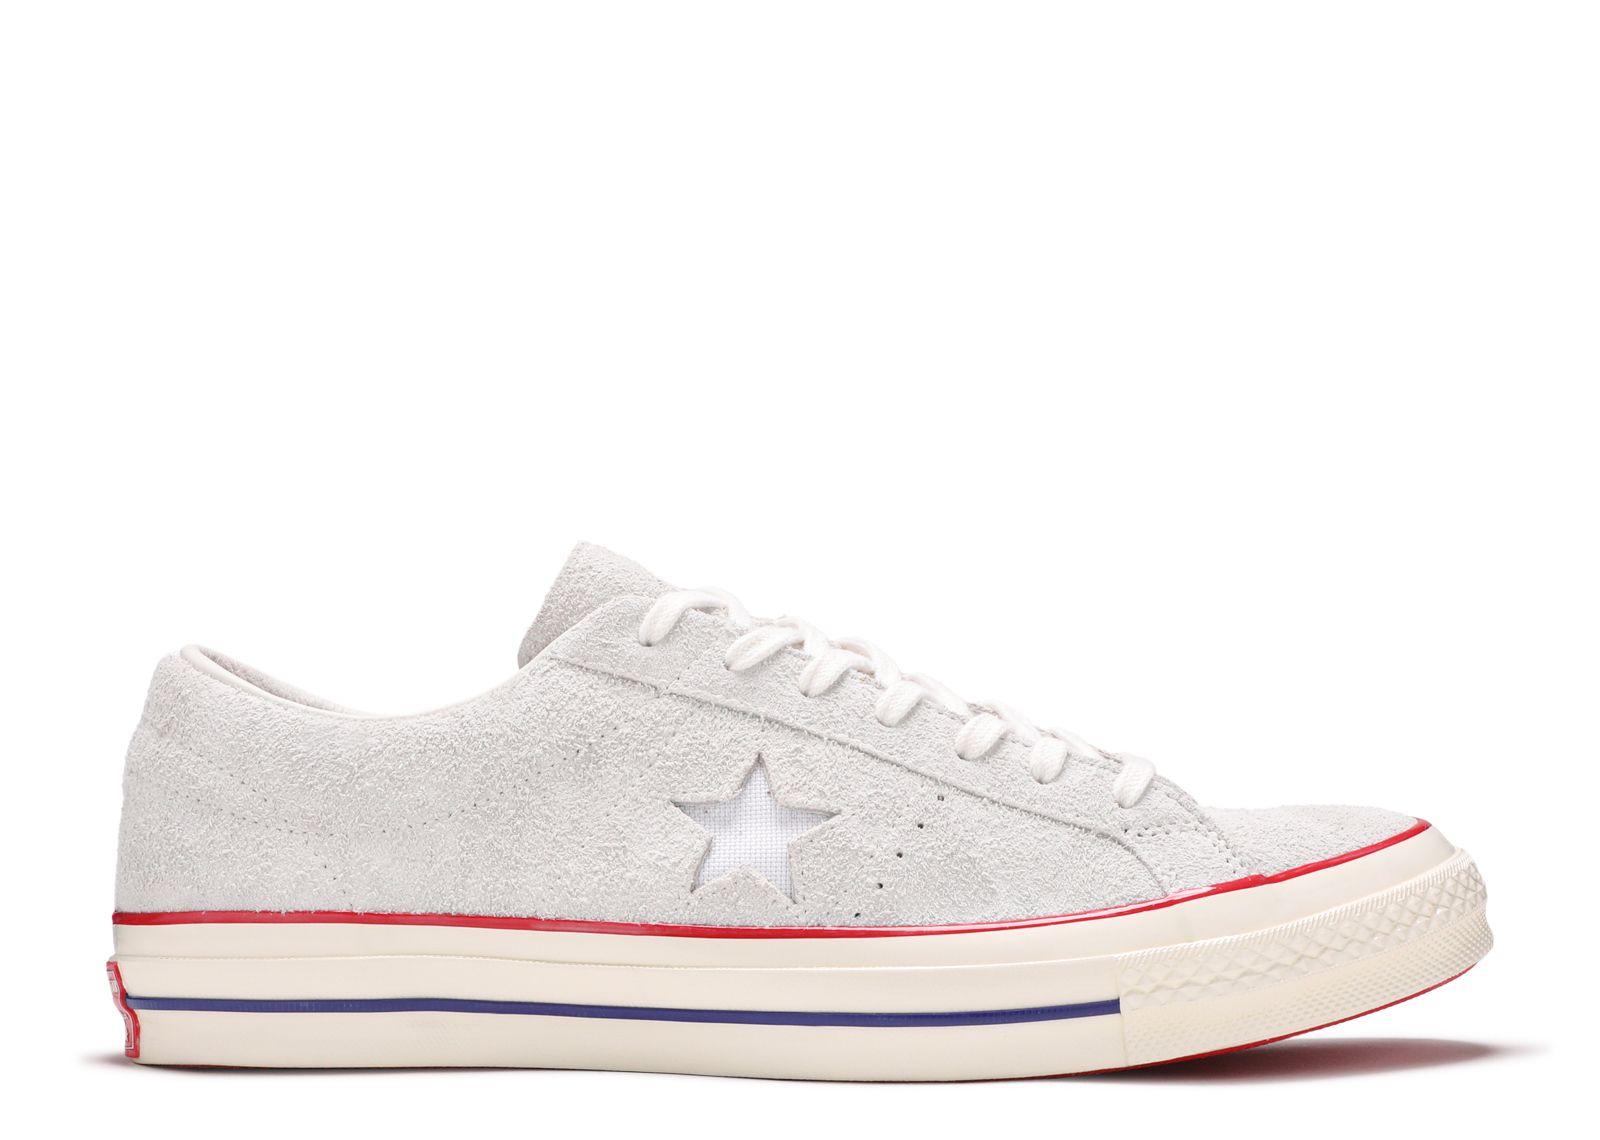 Кроссовки Converse Undefeated X One Star Suede Low 'White', белый